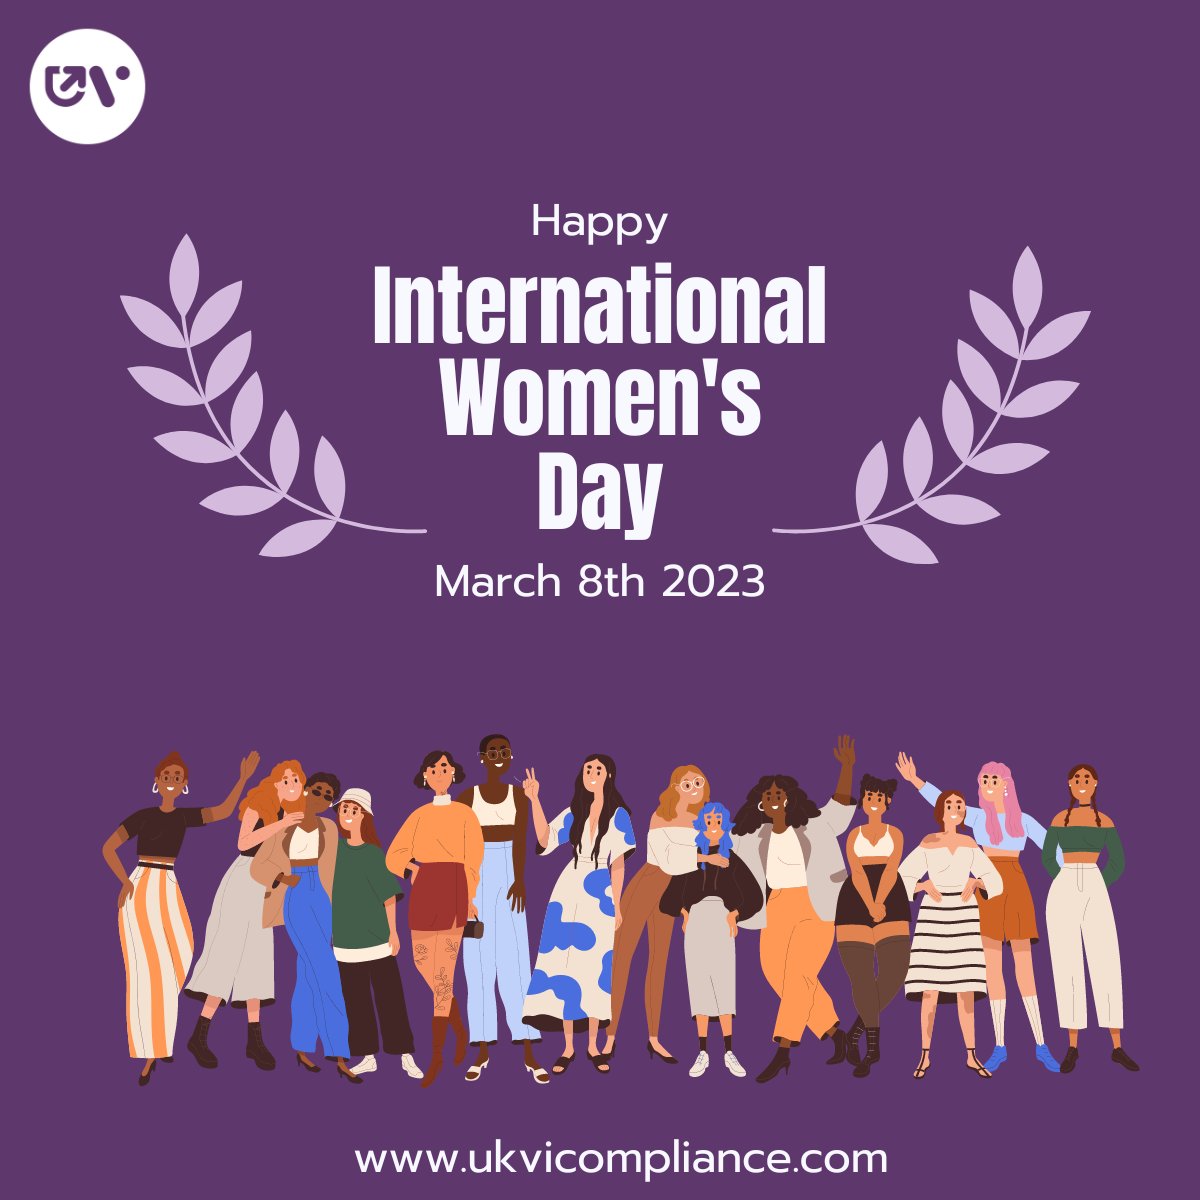 Happy International Women's Day #UKVICompliance! Today, we celebrate women's achievements, resilience, and contributions everywhere. Let's continue to empower each other, break barriers, and strive for gender equality. 💖 #WomenEmpowerment #WomensDay #UKVICompliance #uk